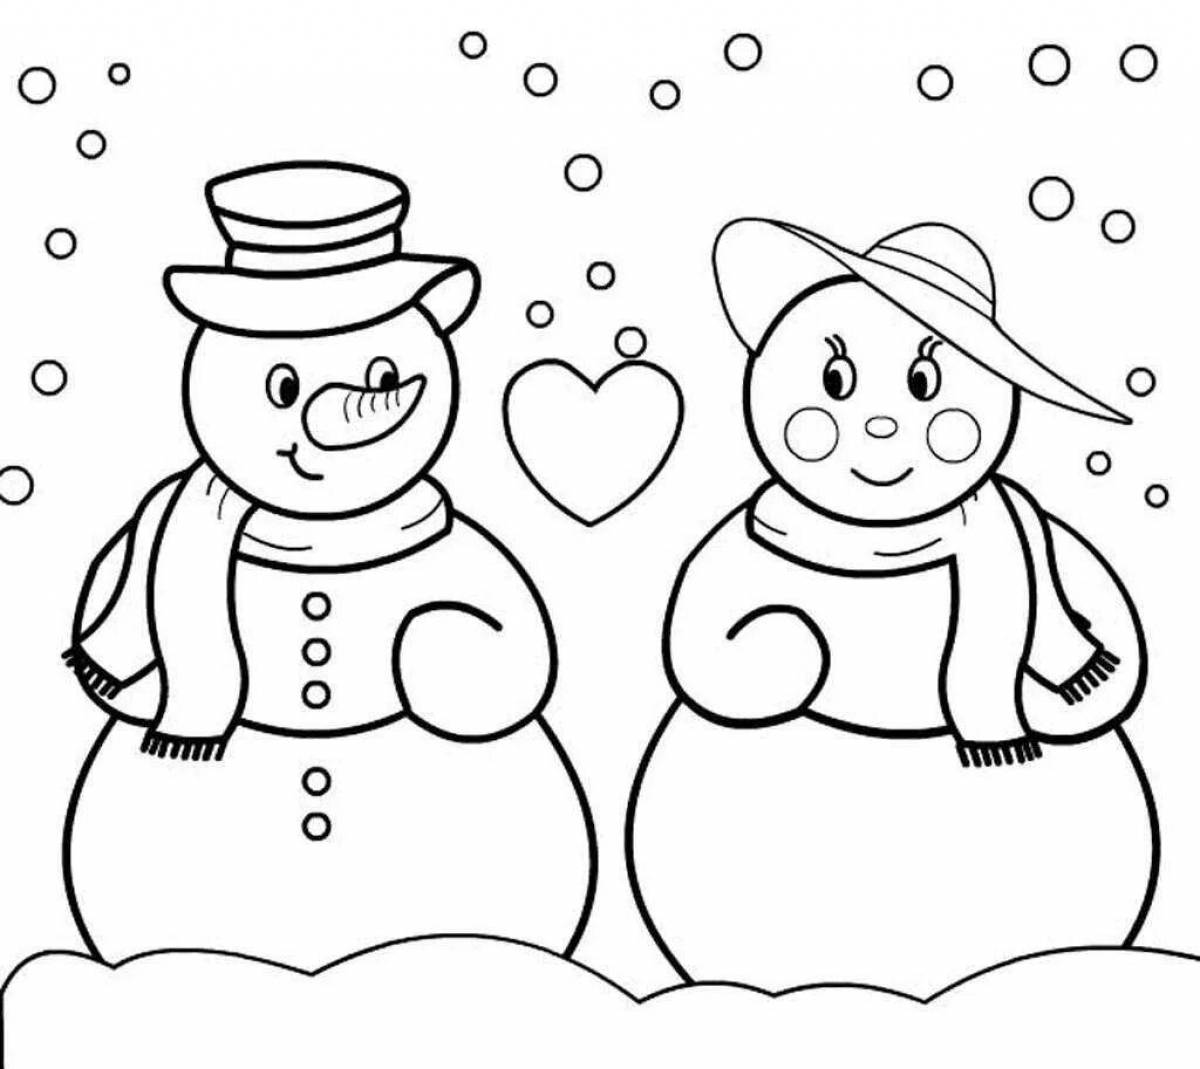 Happy Snowman Day coloring page